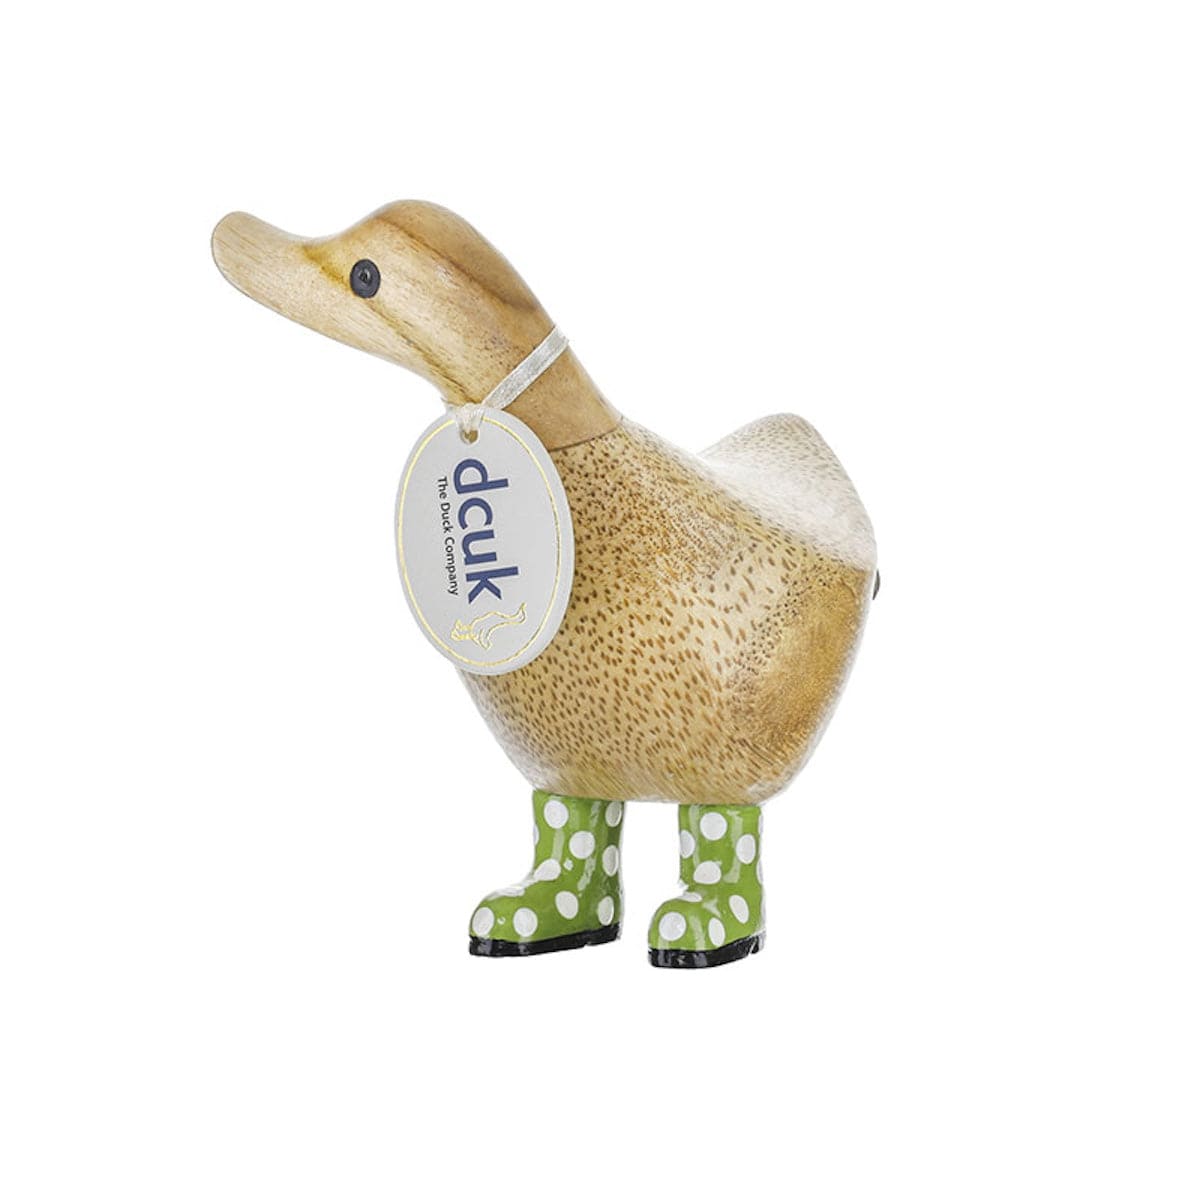 DCUK Ornaments Green Spotty Welly Small Wooden Ducky - Choice of Colour